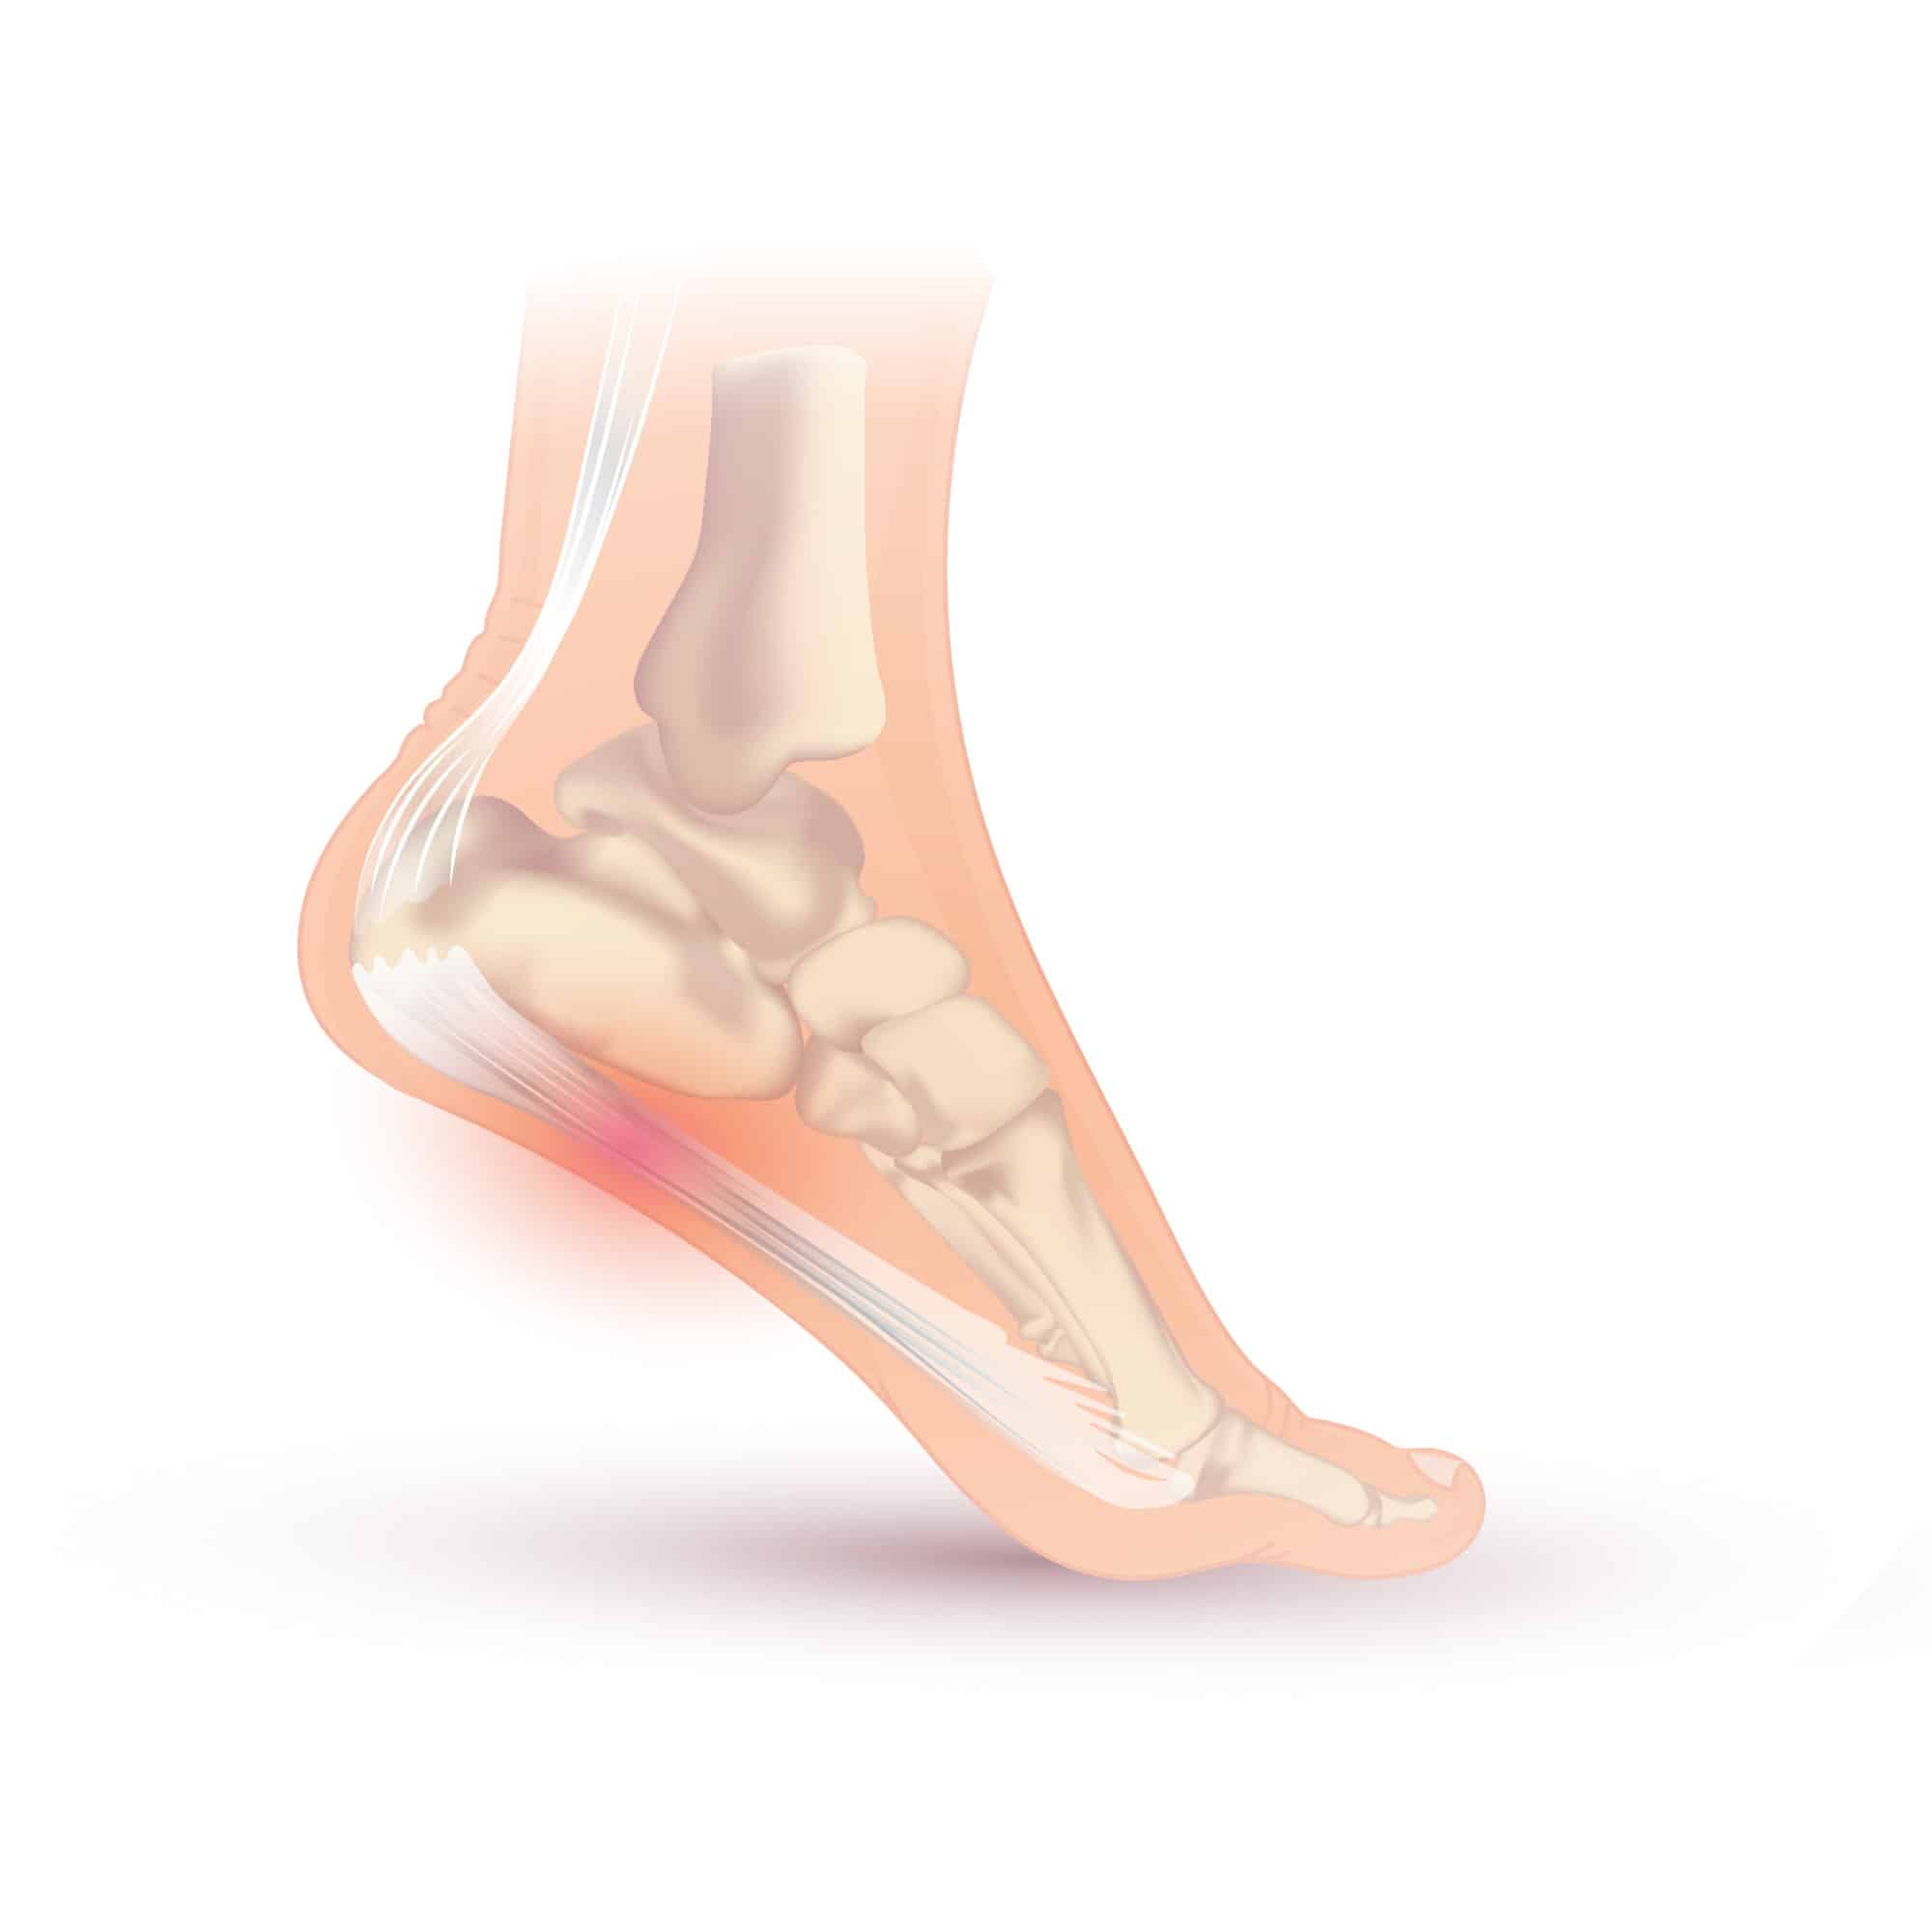 Calf Pain and Achilles Pain - Marlow Sports Therapy